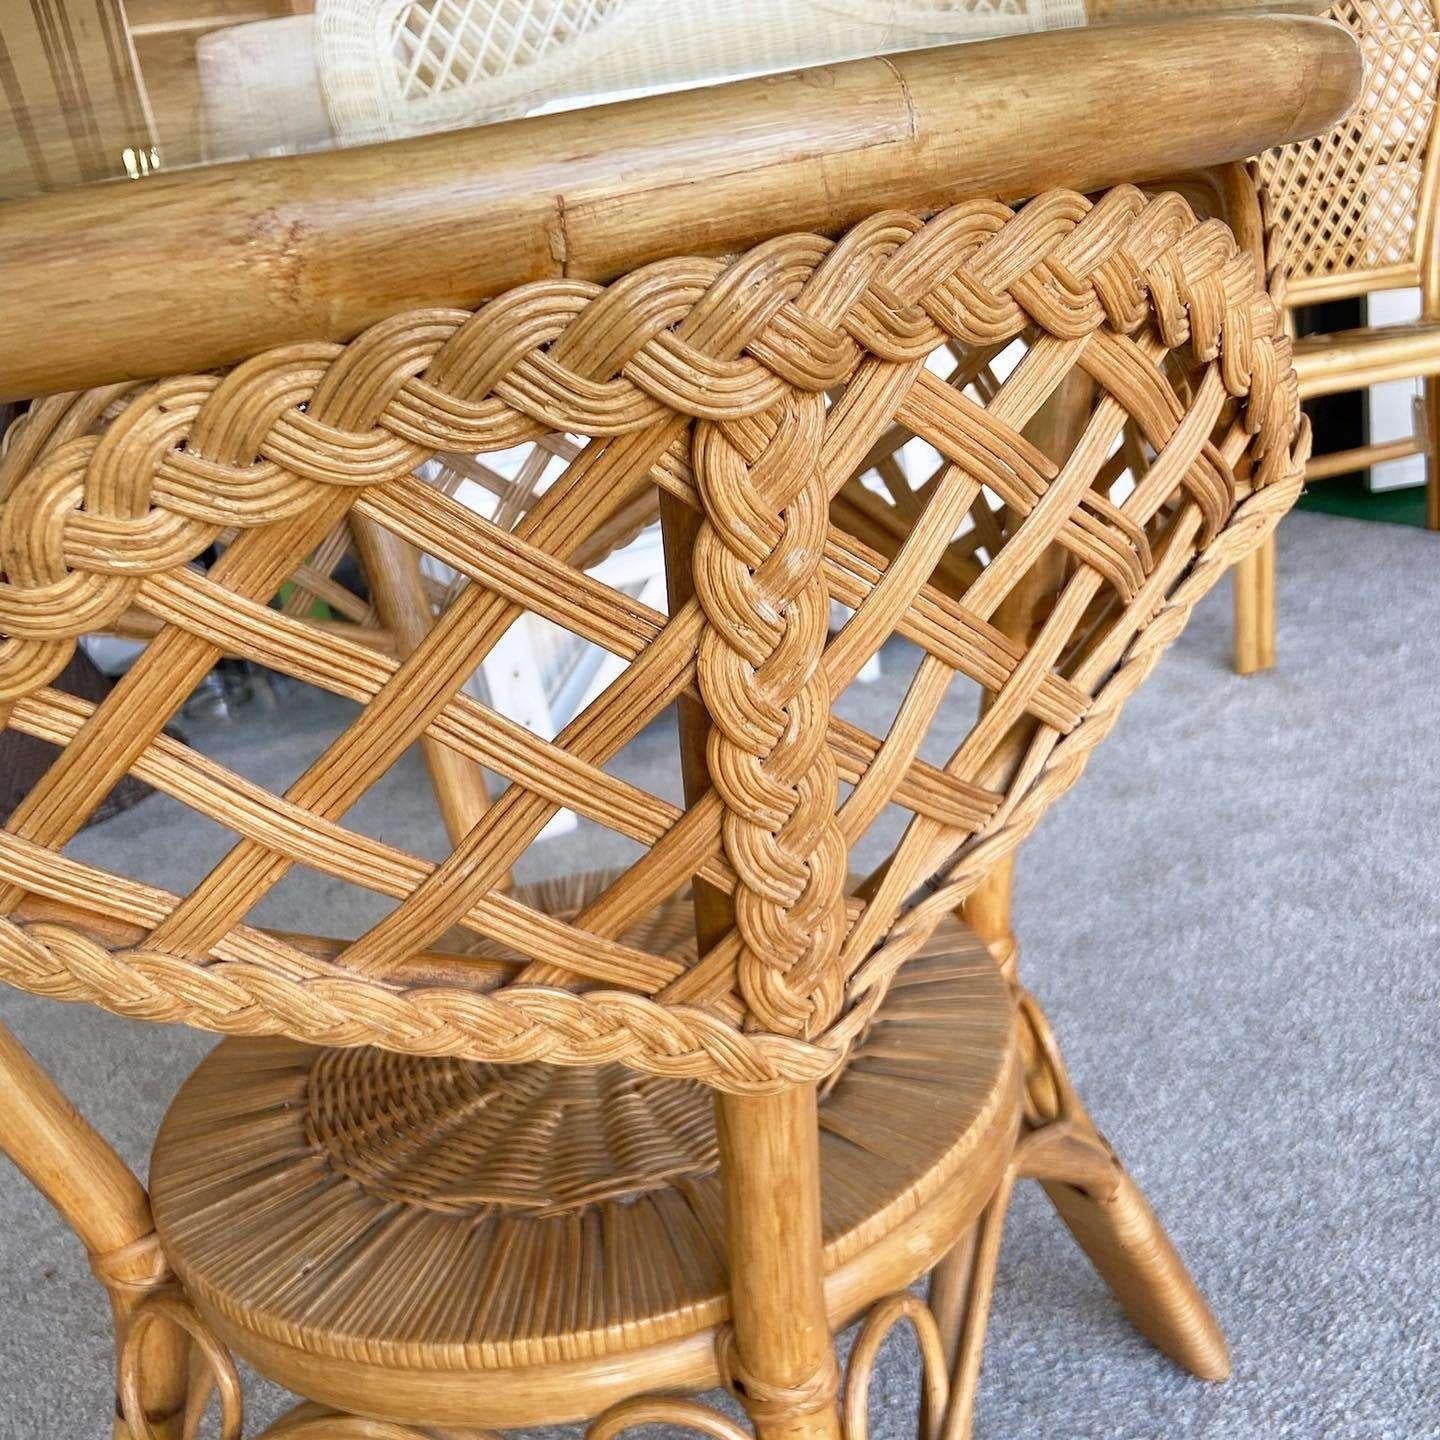 1980s Boho Chic Rattan and Woven Wicker Circular Glass Top Dining Table For Sale 2